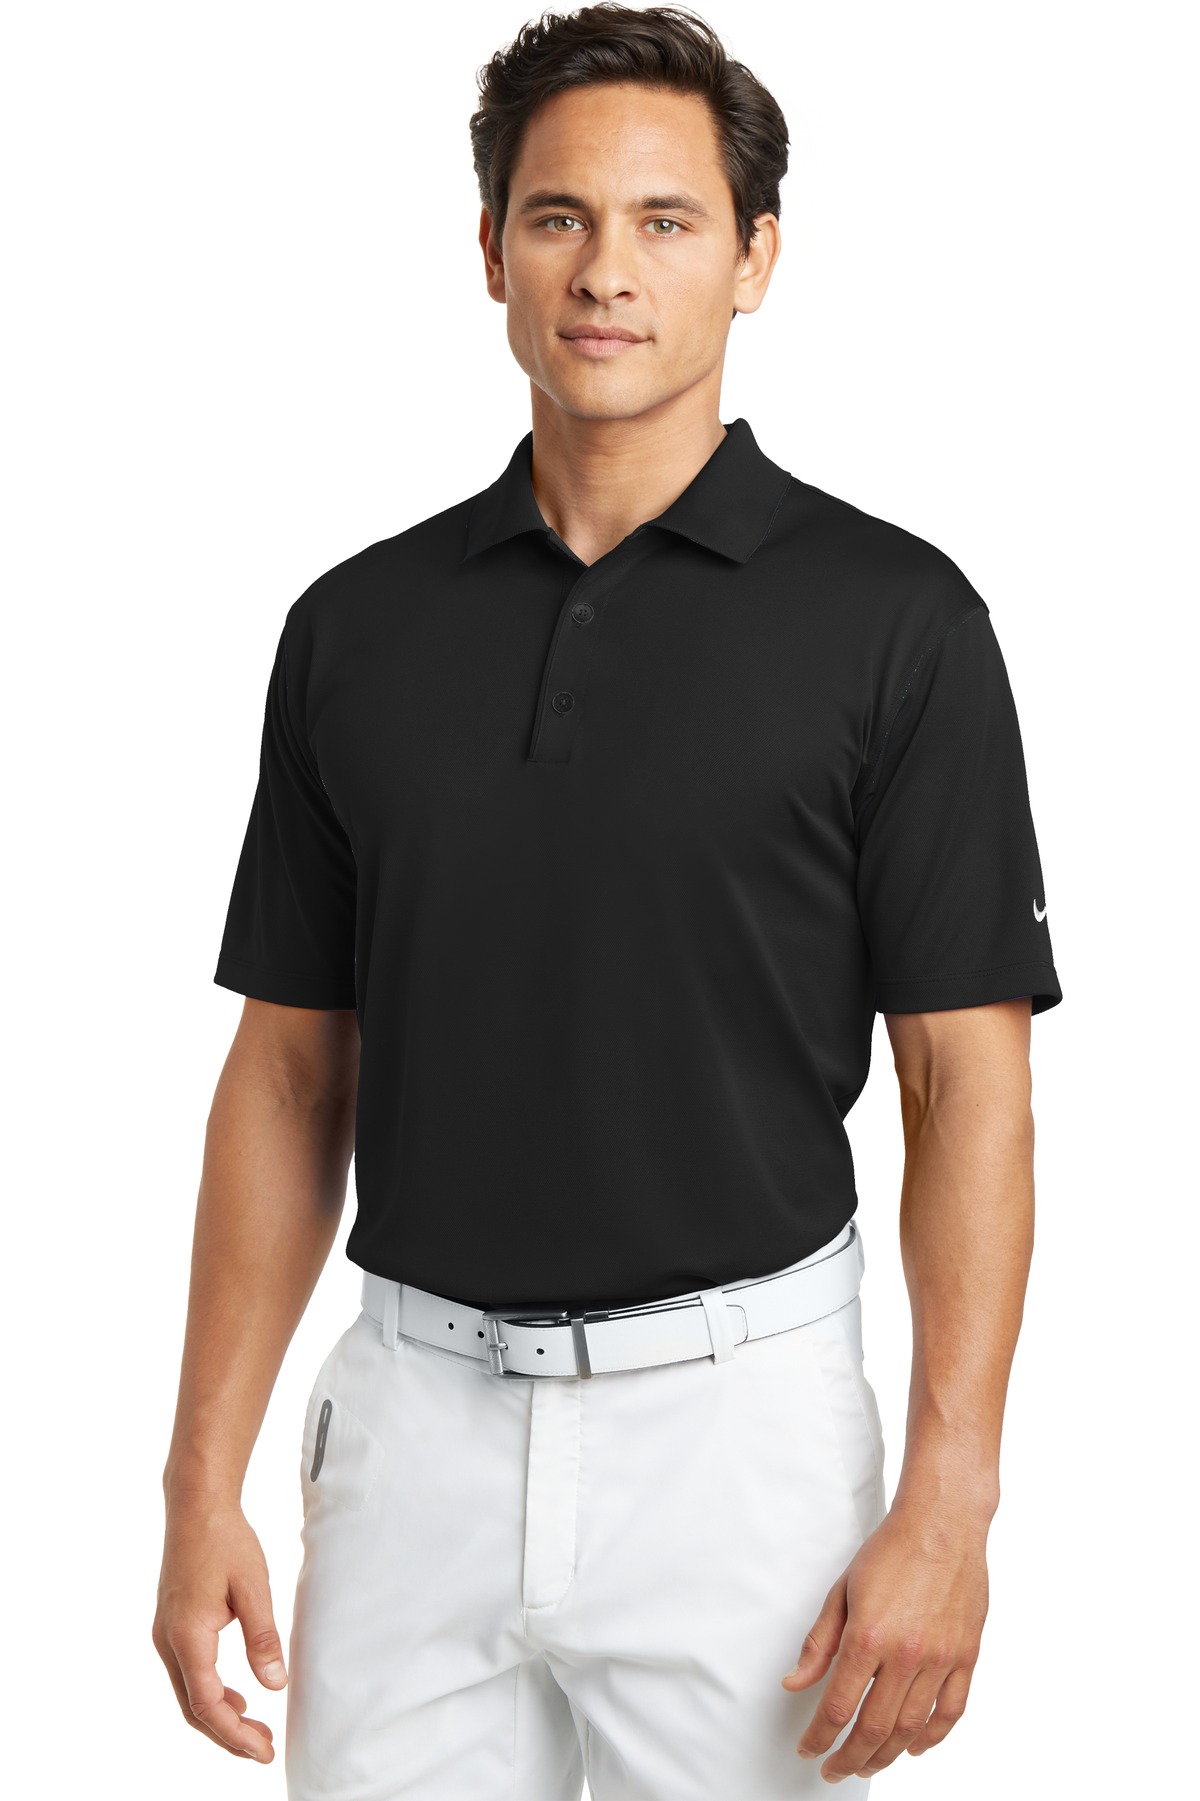 Buy Nike Golf - Tech Basic Dri-FIT Polo. - SM_NG Online at Best price - MS